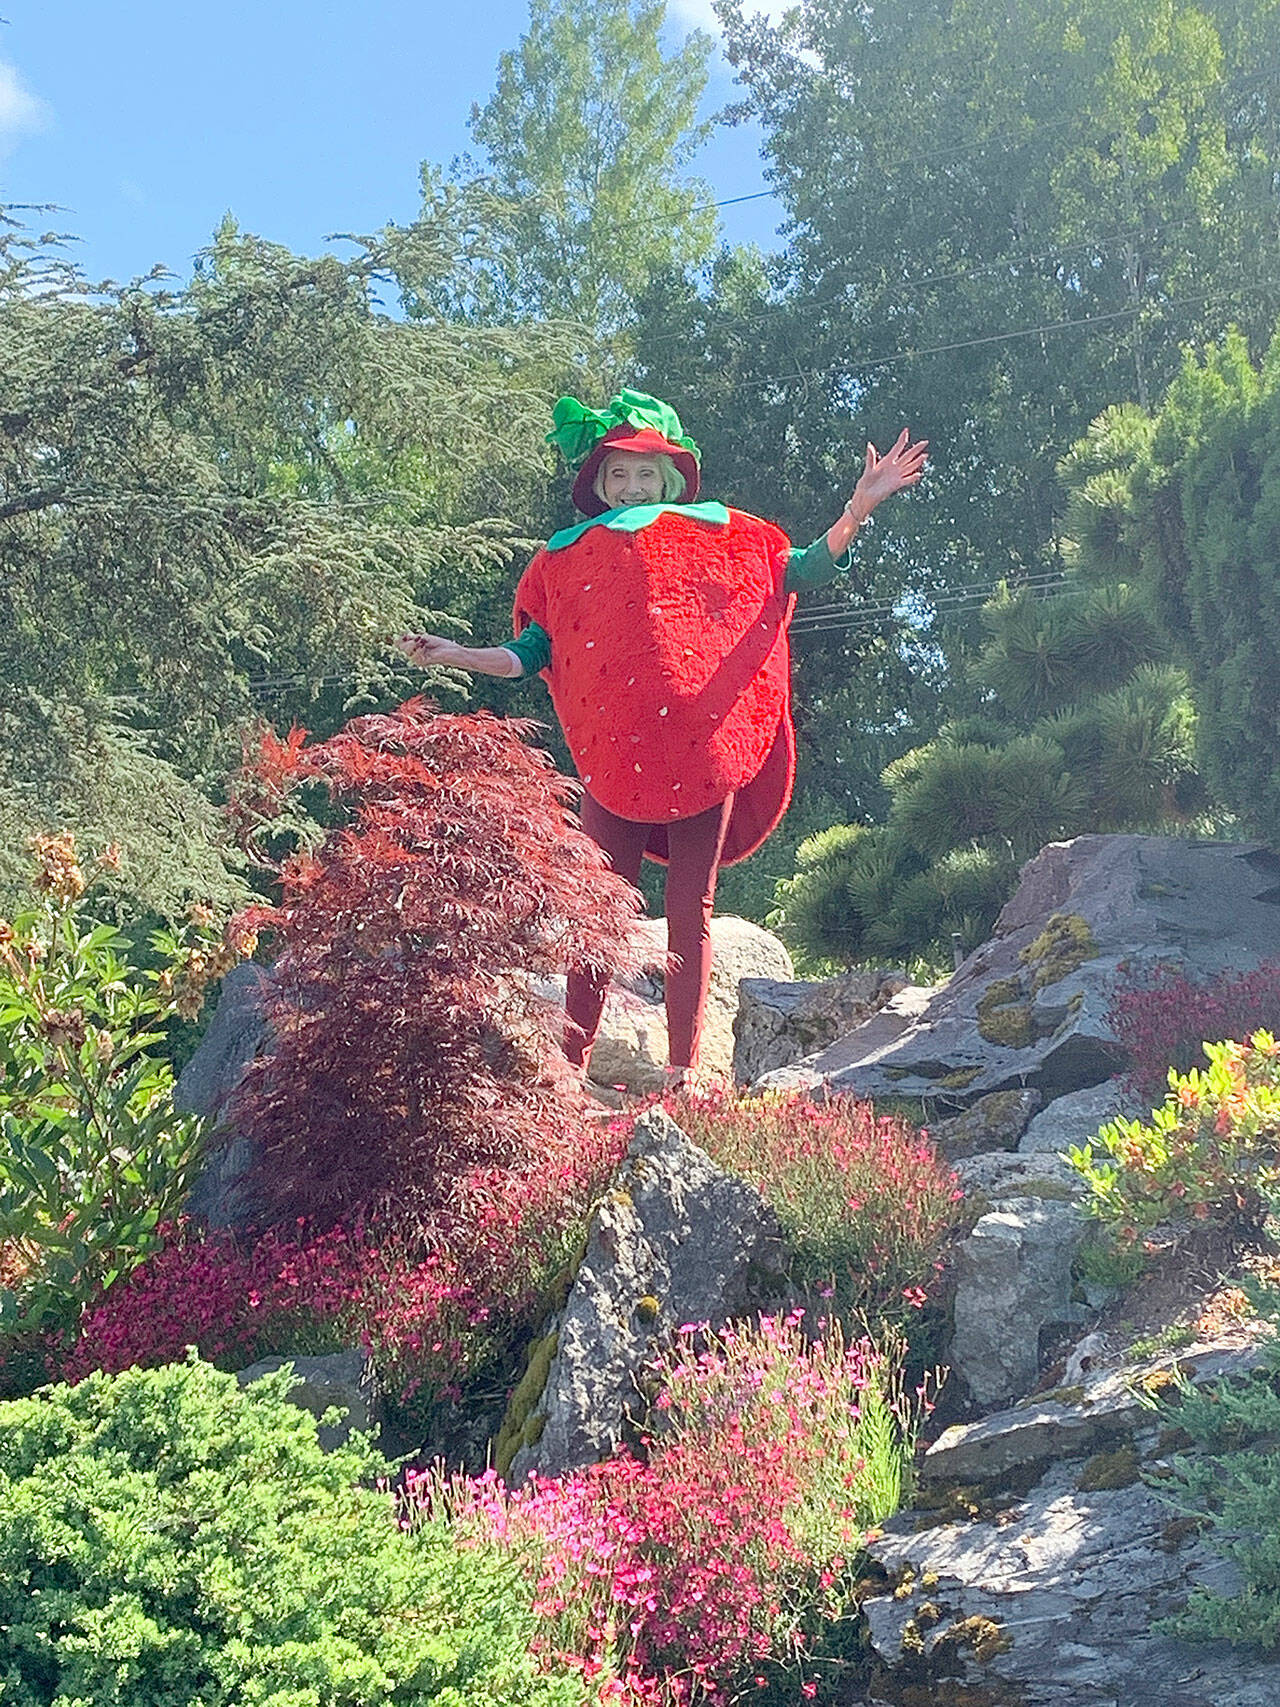 (Courtesy Photo) Board Member and past Mukai Farm & Garden president, Kay Longhi, embodied the character of Mukai’s Marshall Strawberry at the 2021 Strawberry Festival. This year, another board member will take on the role, serving as Grand Marshal of the festival parade.